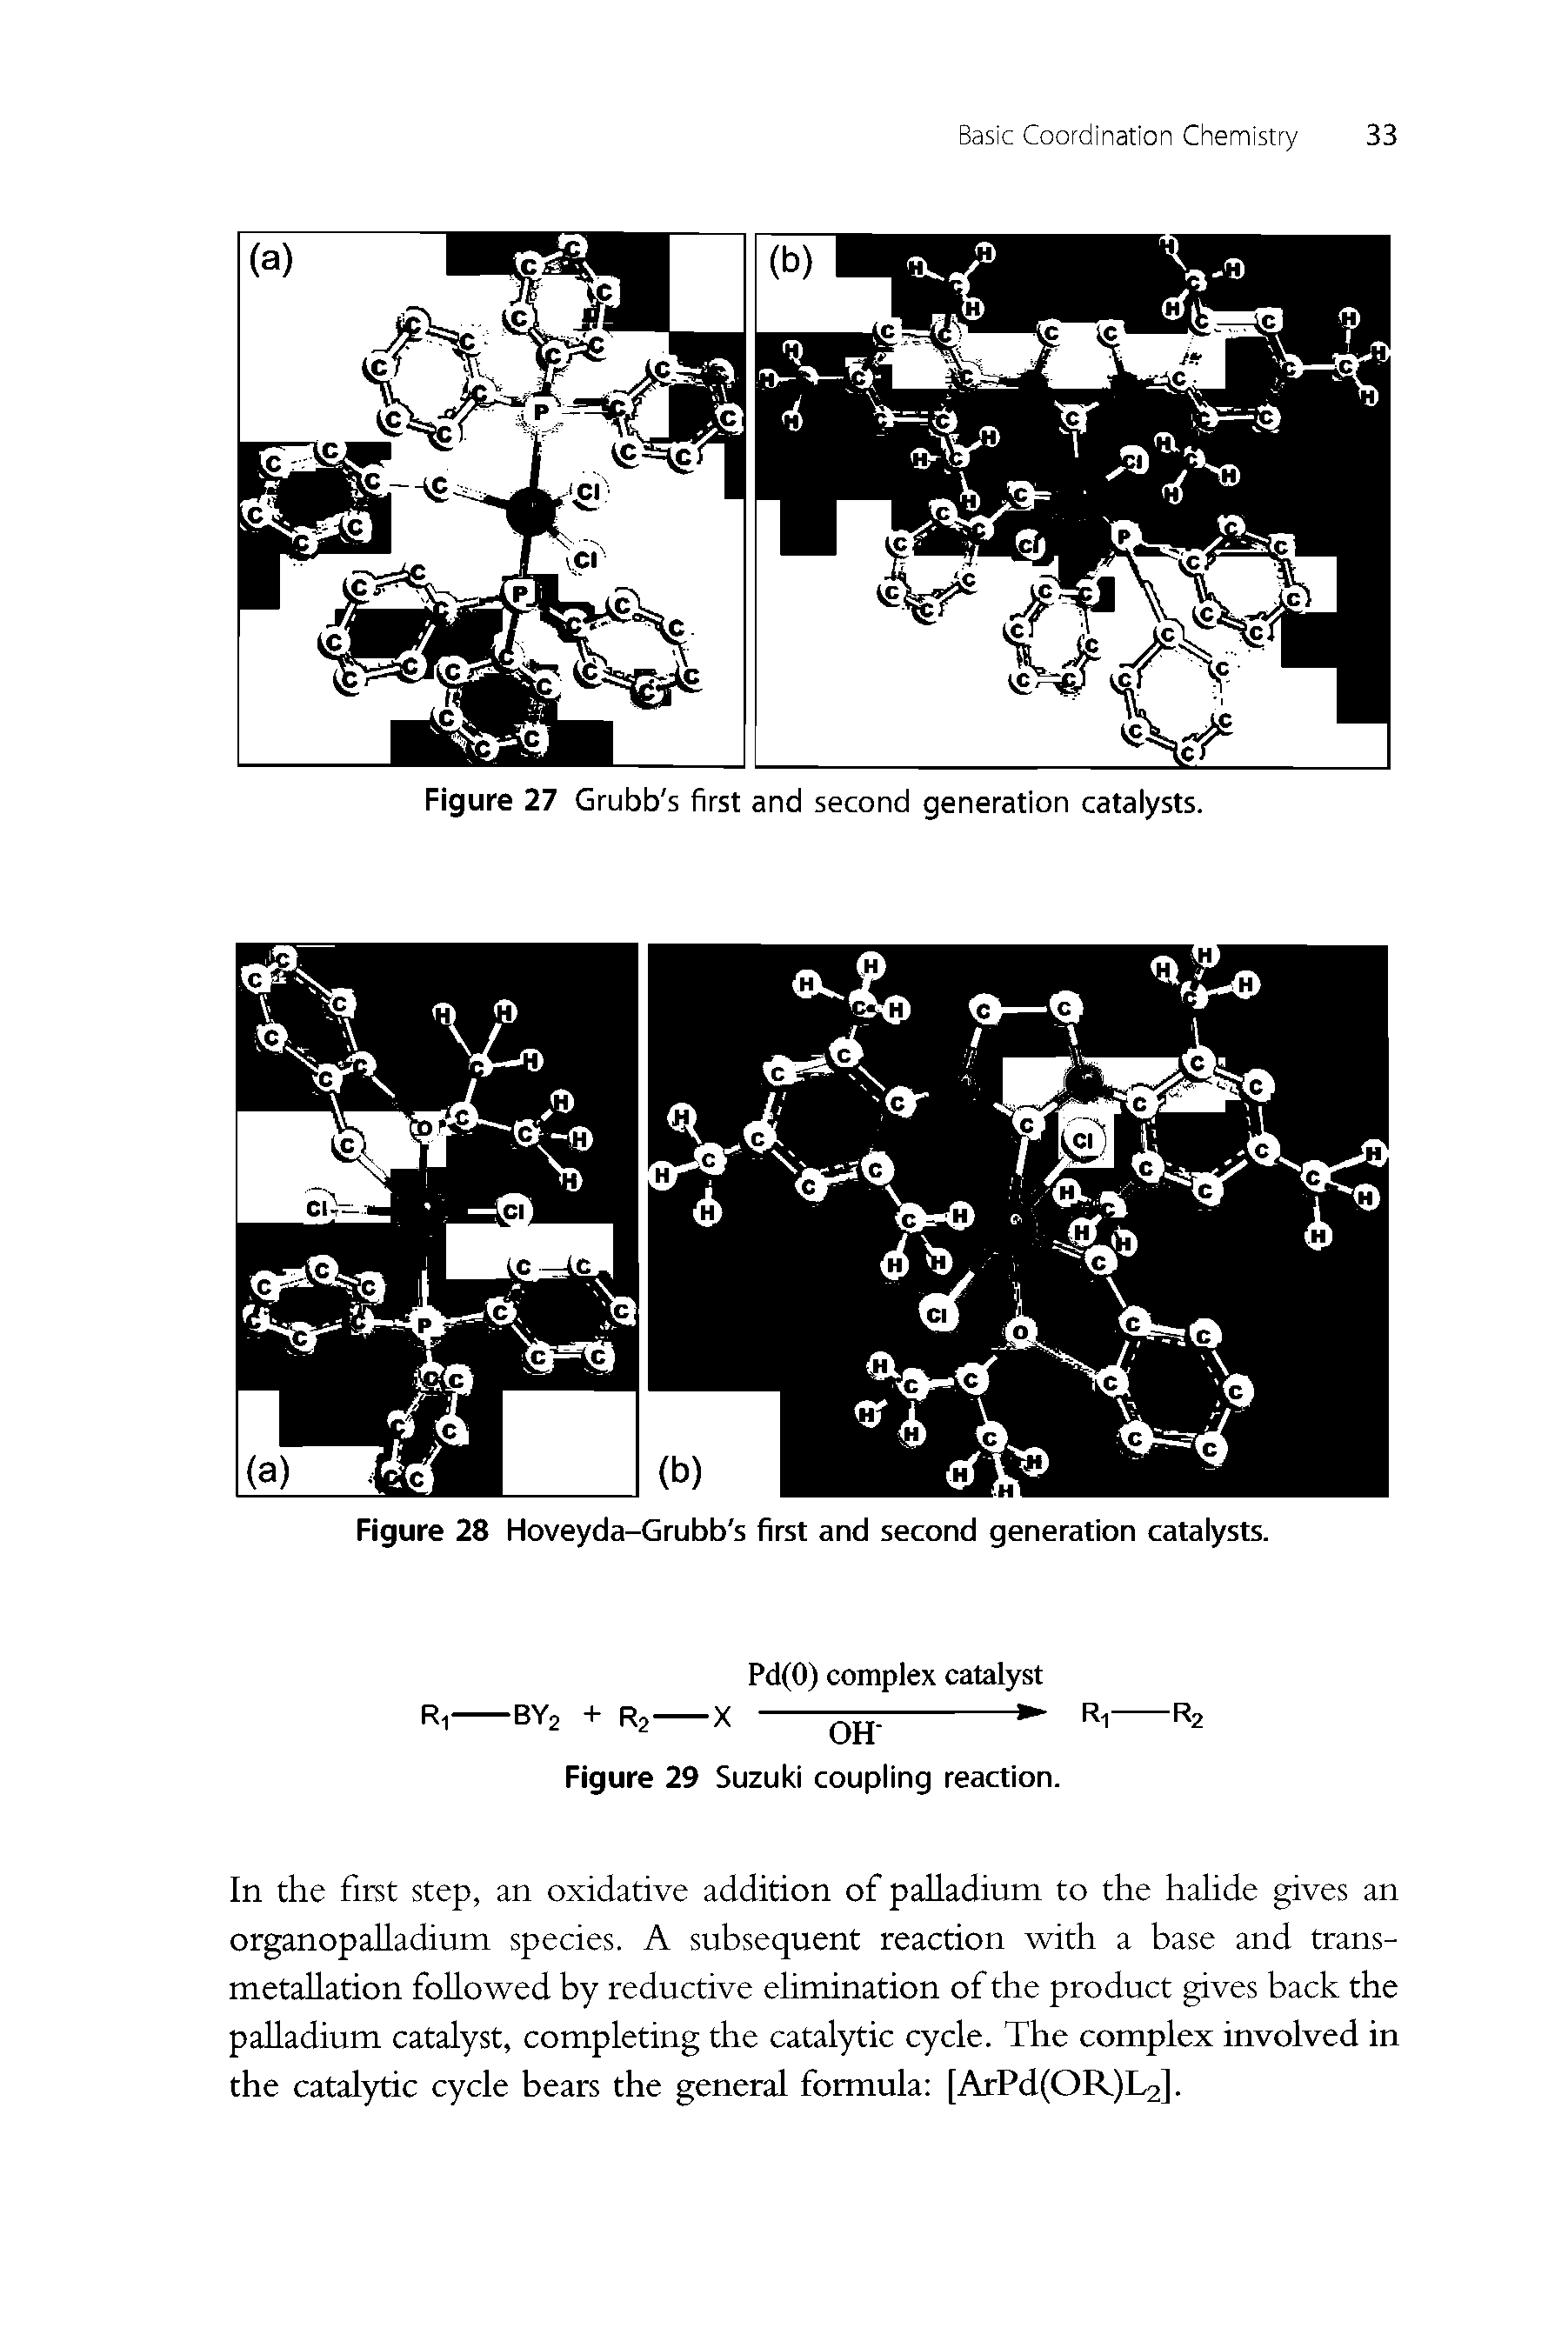 Figure 28 Hoveyda-Grubb s first and second generation catalysts.